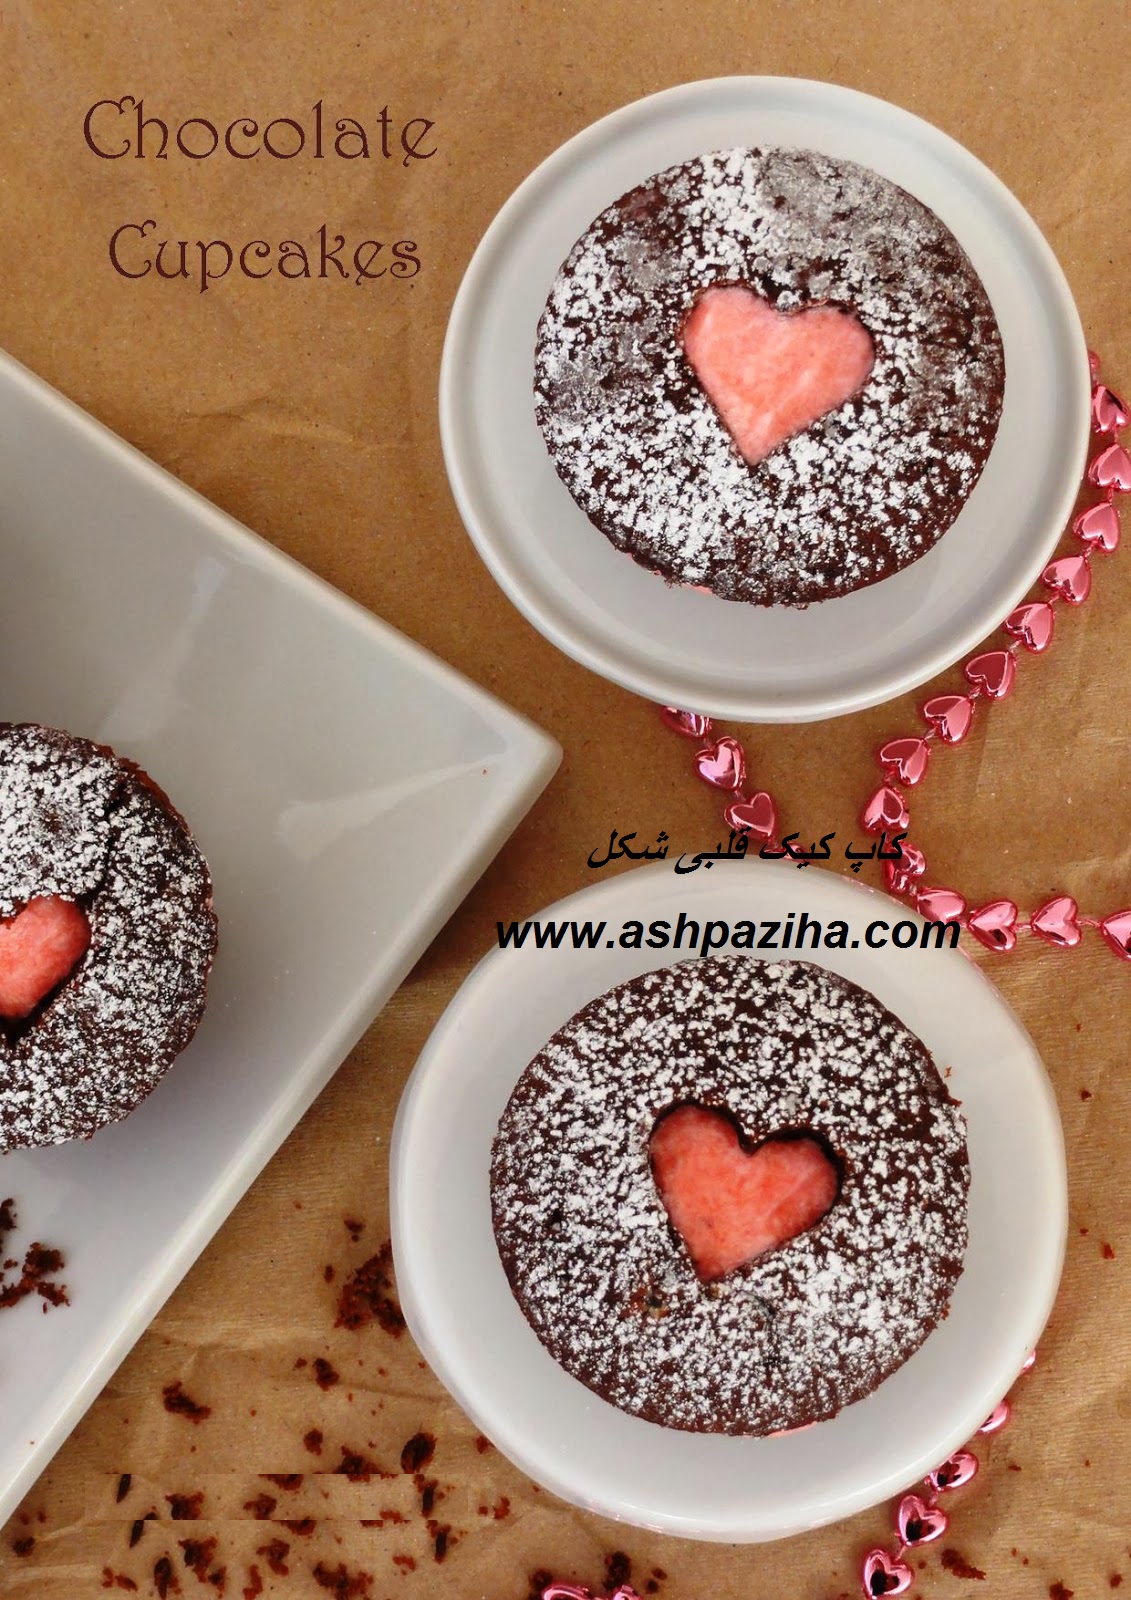 Recipe - Cup - Cakes - Chocolate - heart - shaped - the training - image